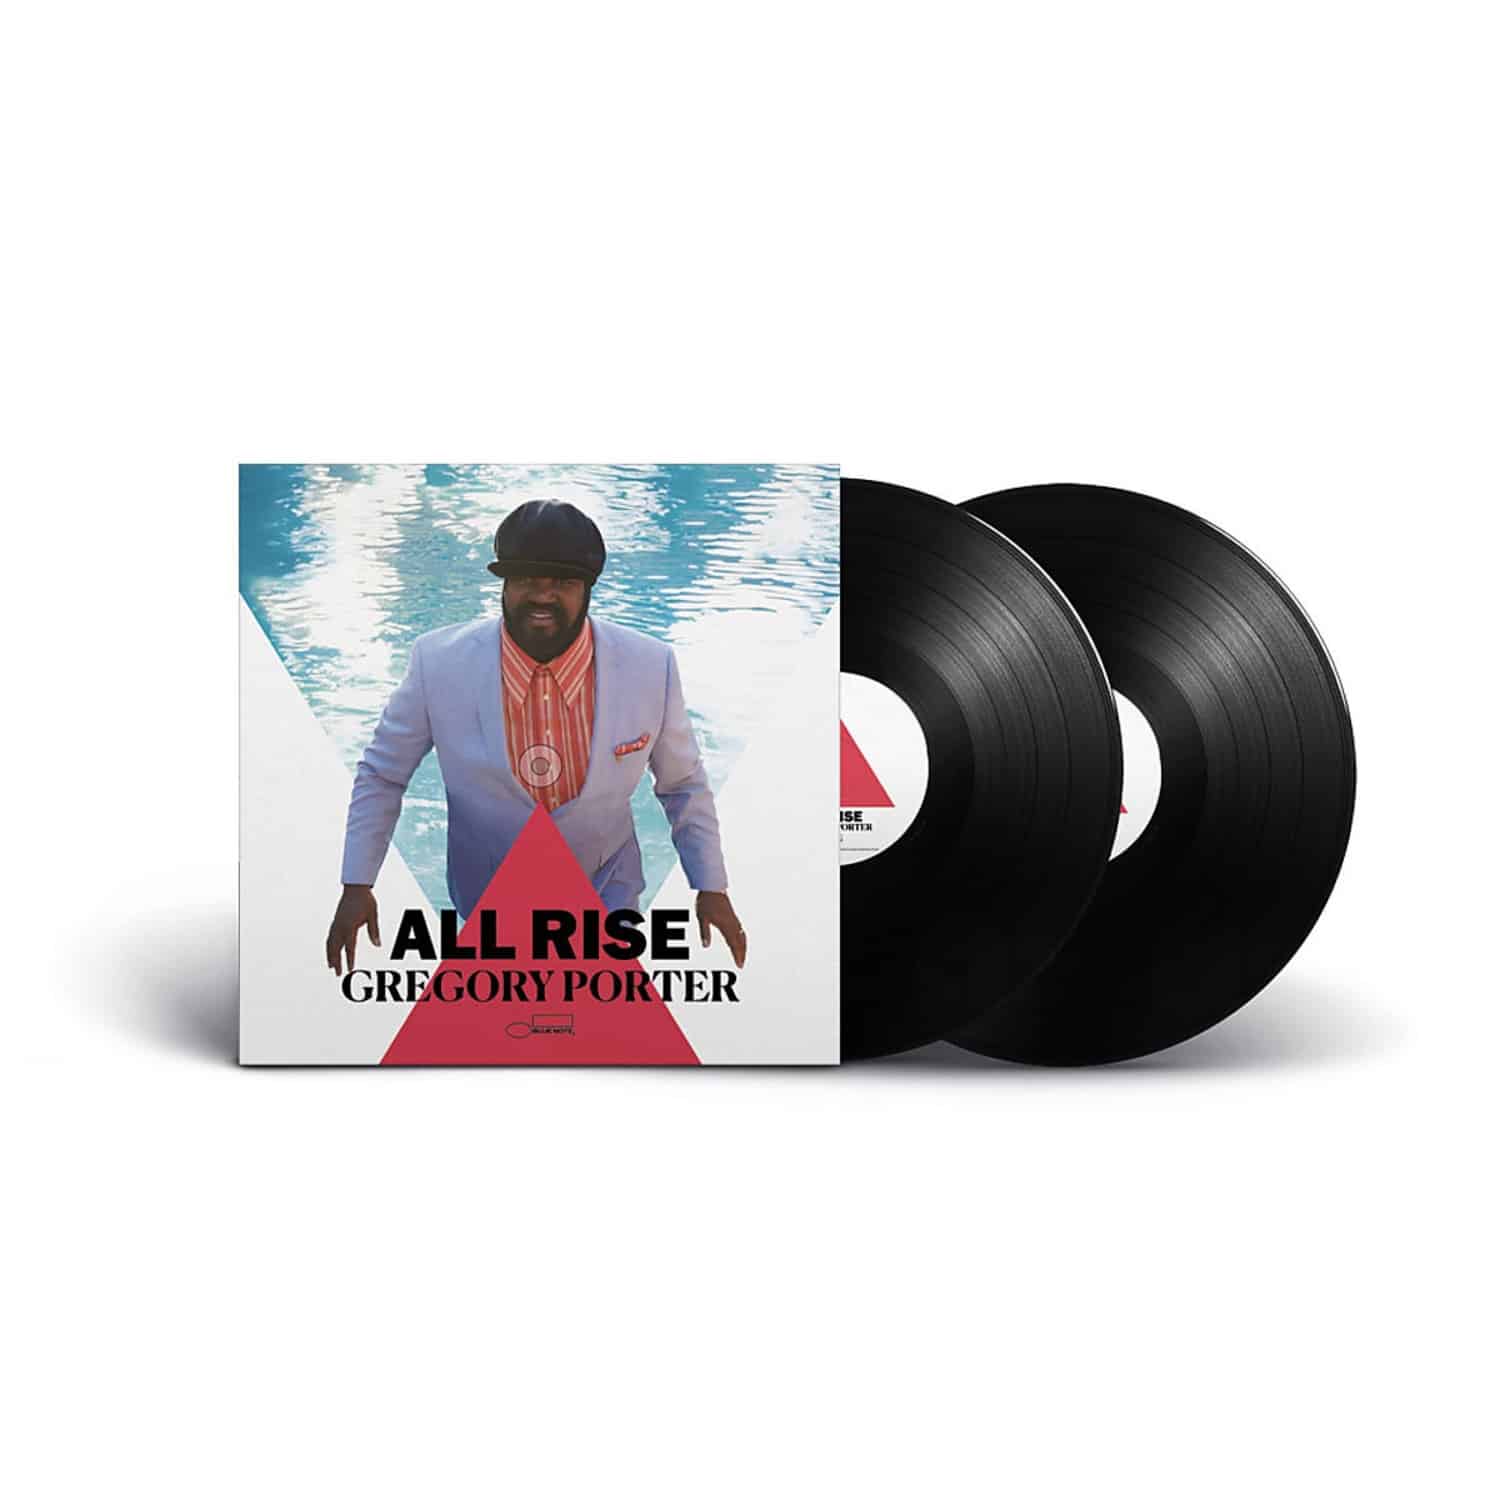 Gregory Porter - ALL RISE 